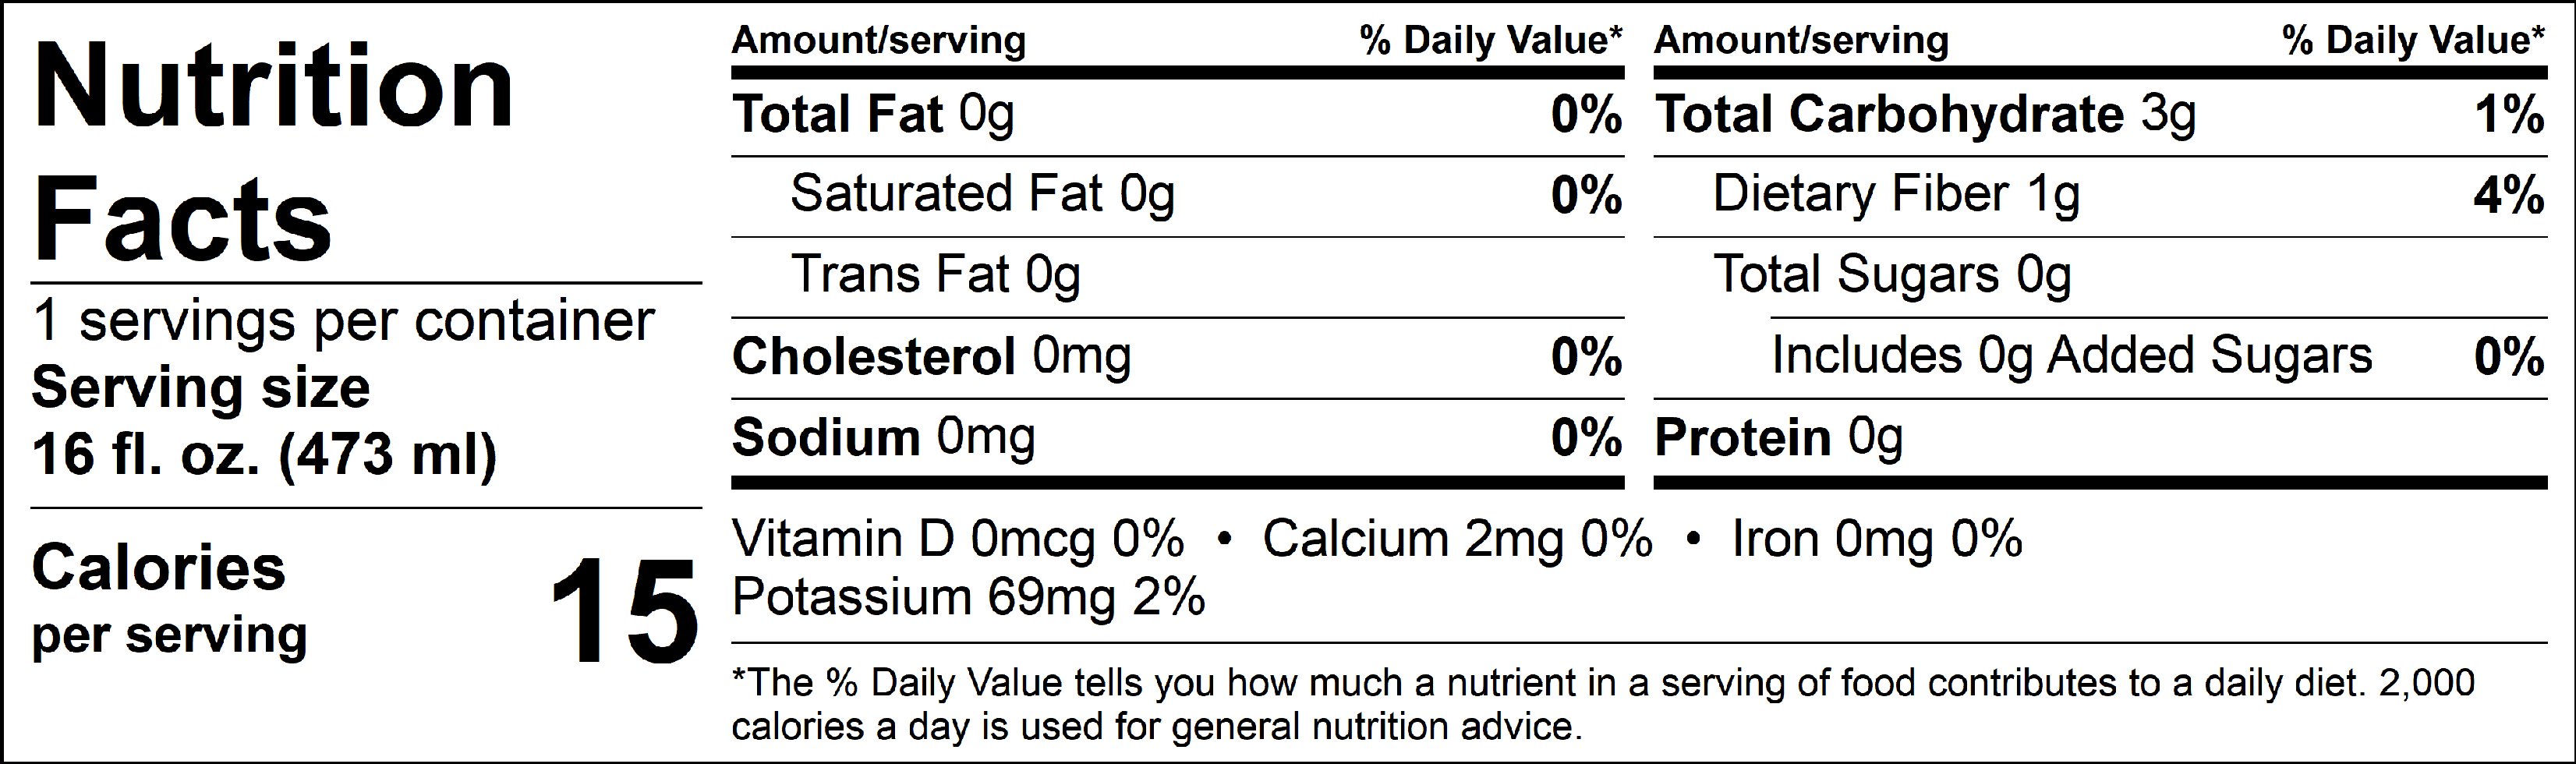 Rate nutrition. Amount Nutrition facts. Nutritional value of food. Nutritional value facts. Nutrition facts Table.